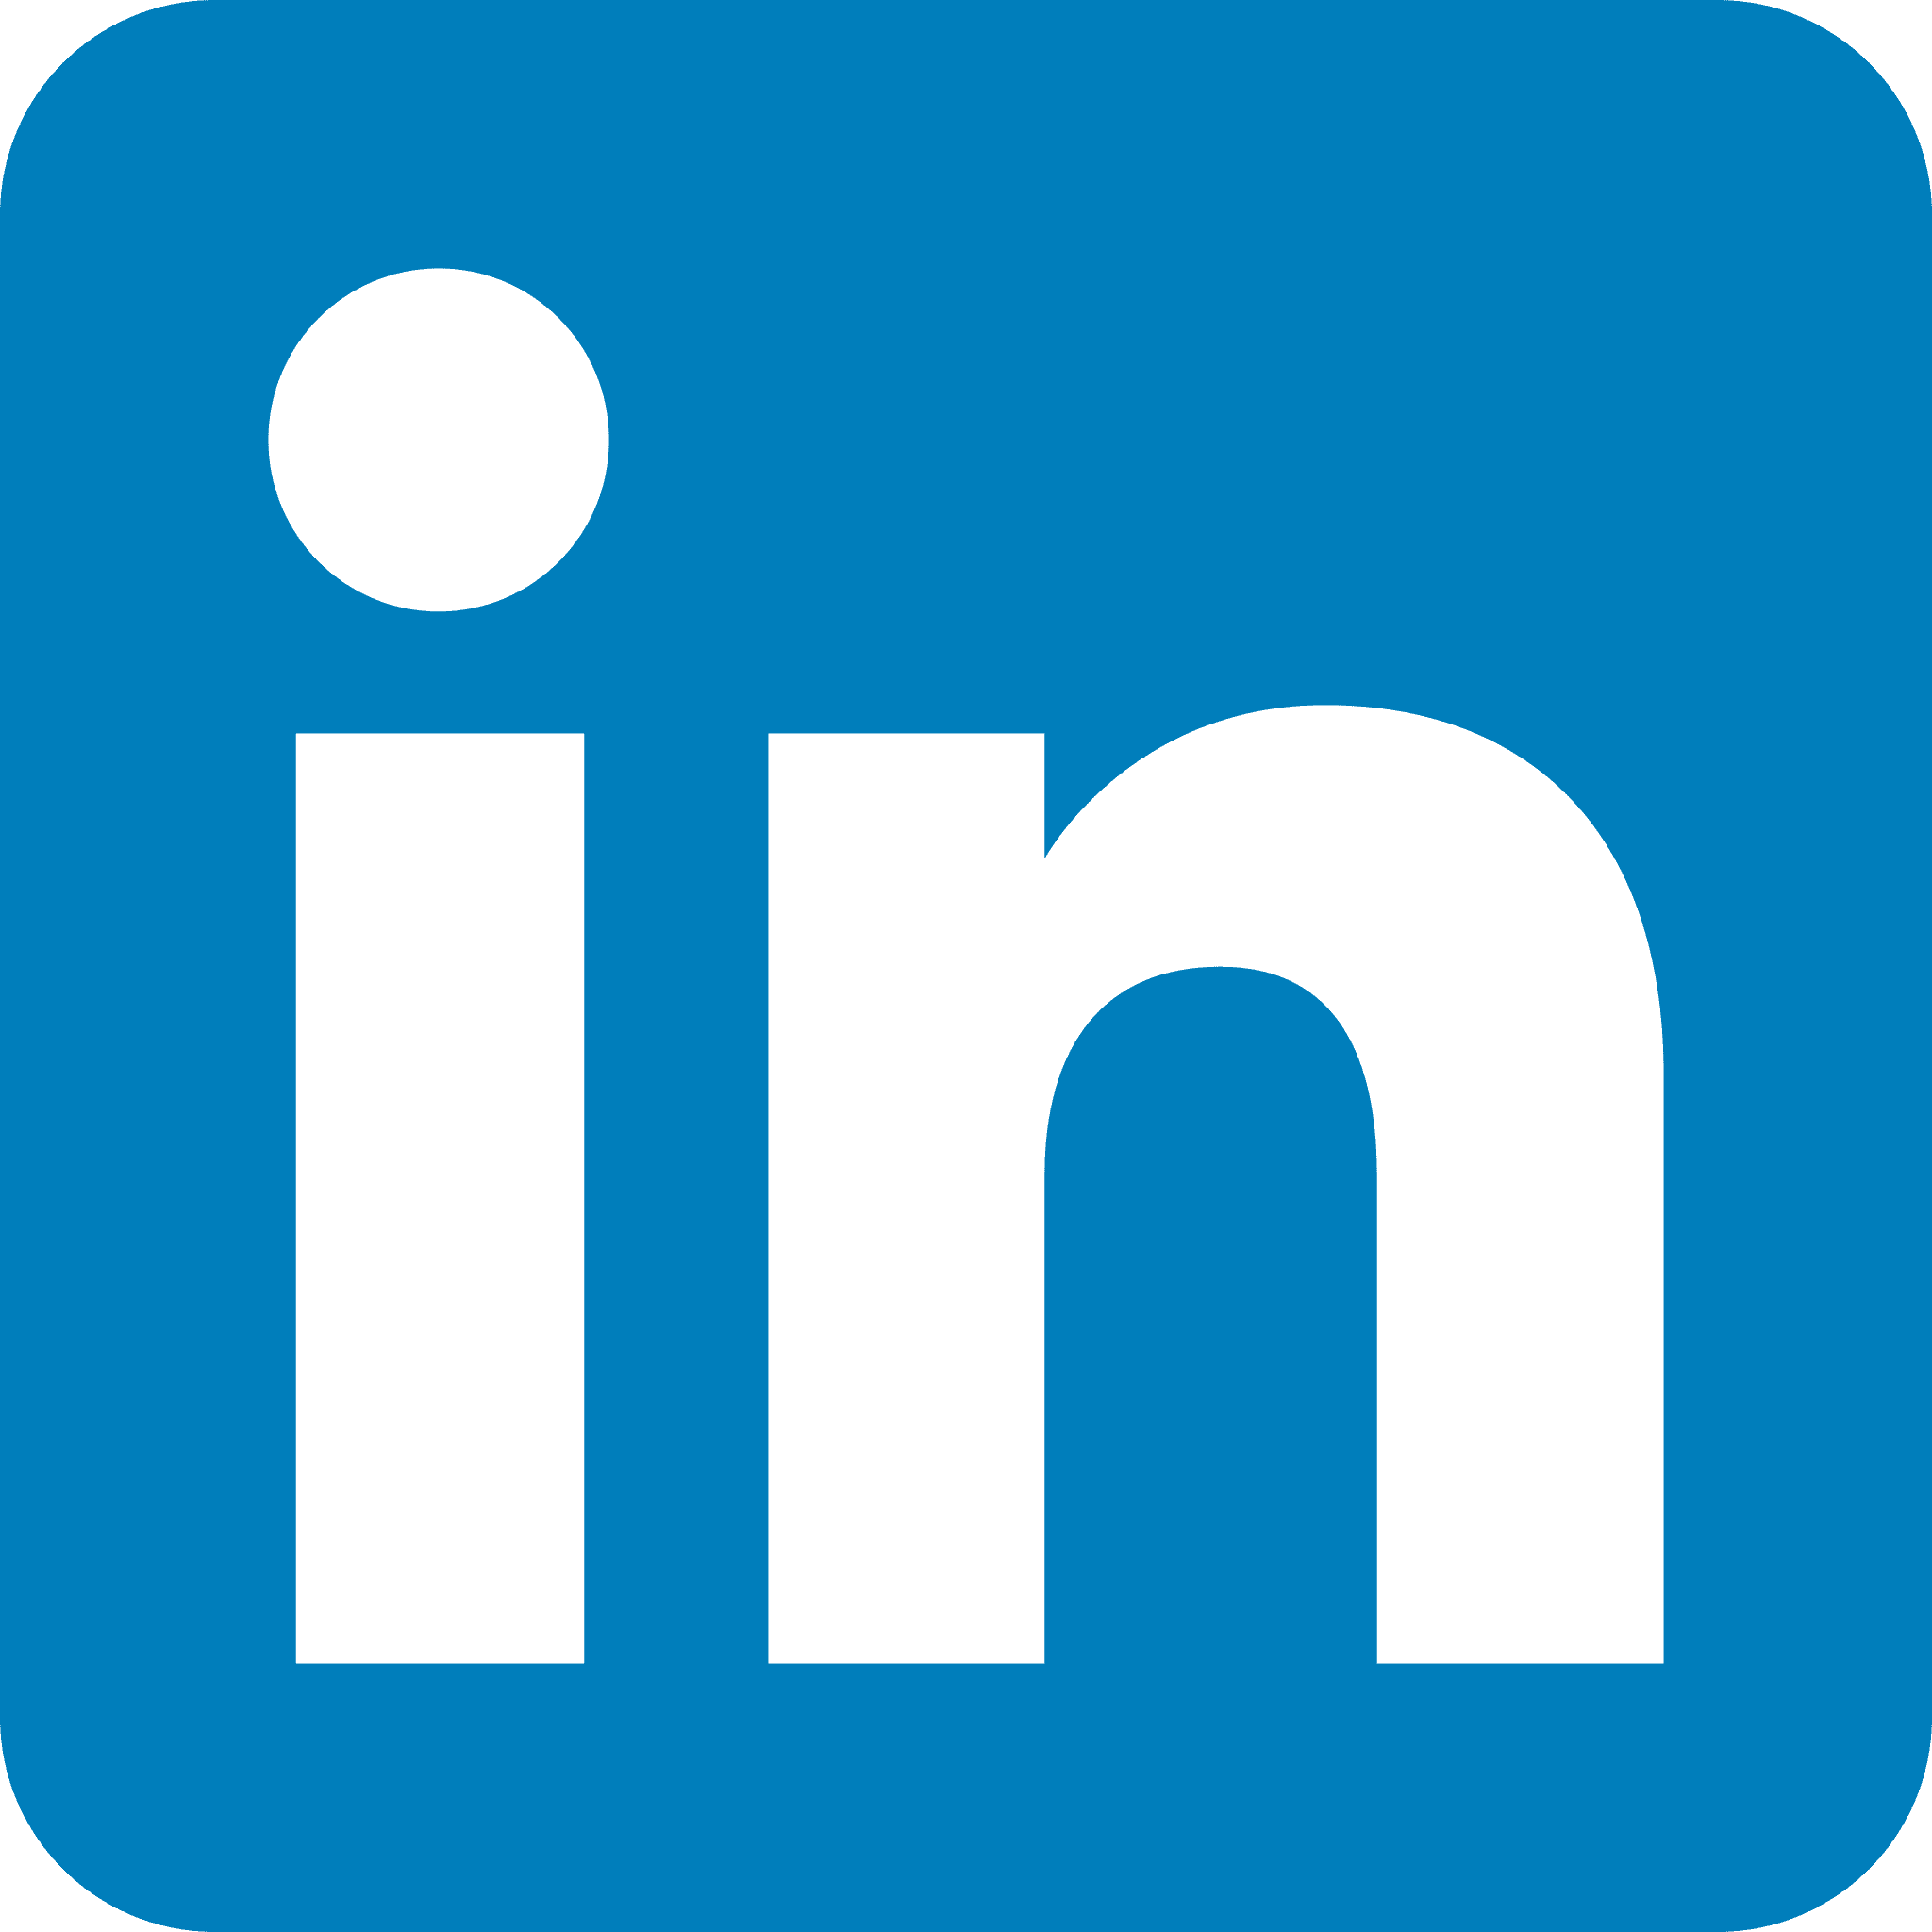 Linked in logo - A white rounded square with the white letter 'in' inside the square.